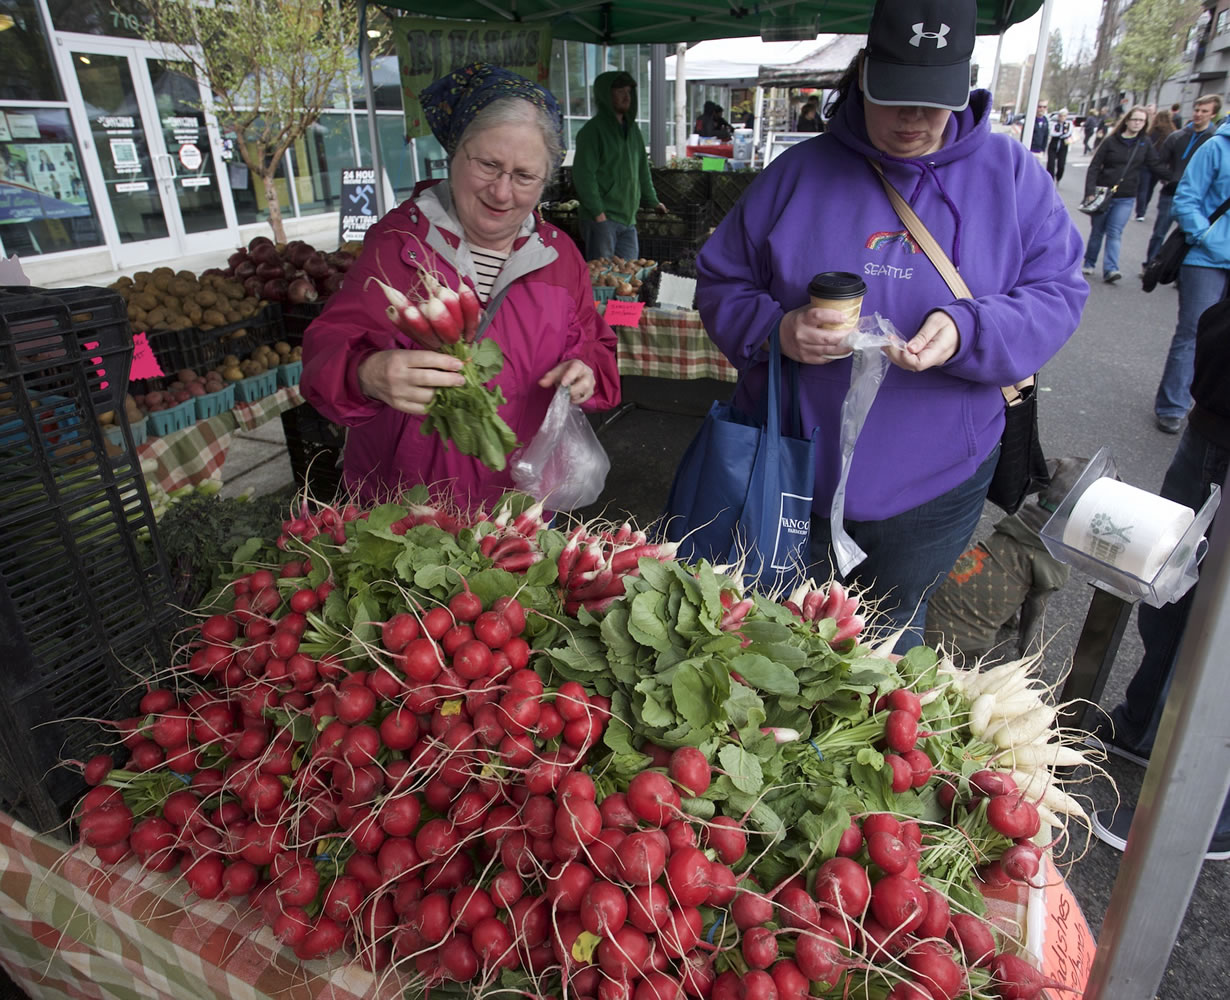 Photos by Steve Dipaola for the Columbian
Shoppers select fresh vegetables Saturday -- the second day of spring -- at the first Vancouver Farmers Market of 2015.